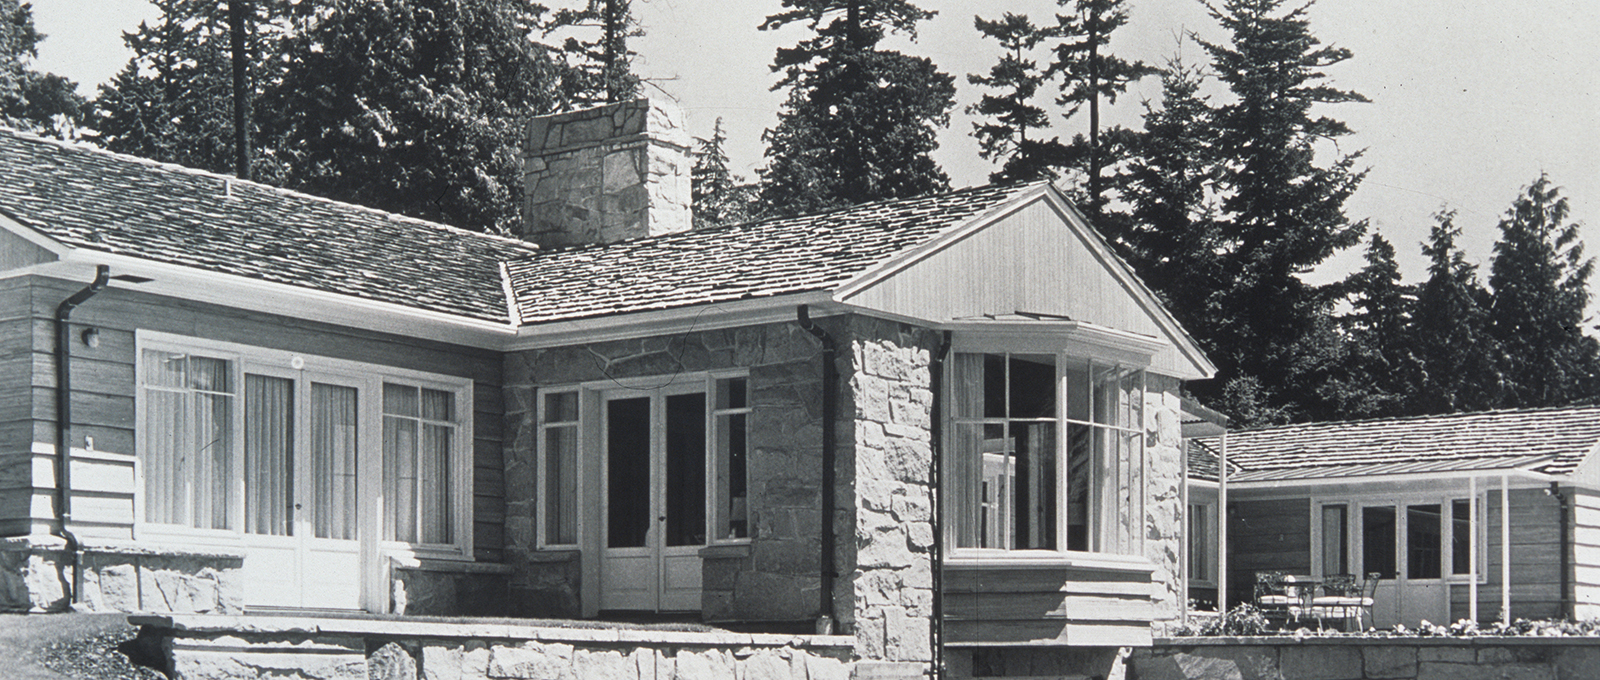 The Miller home, 1953